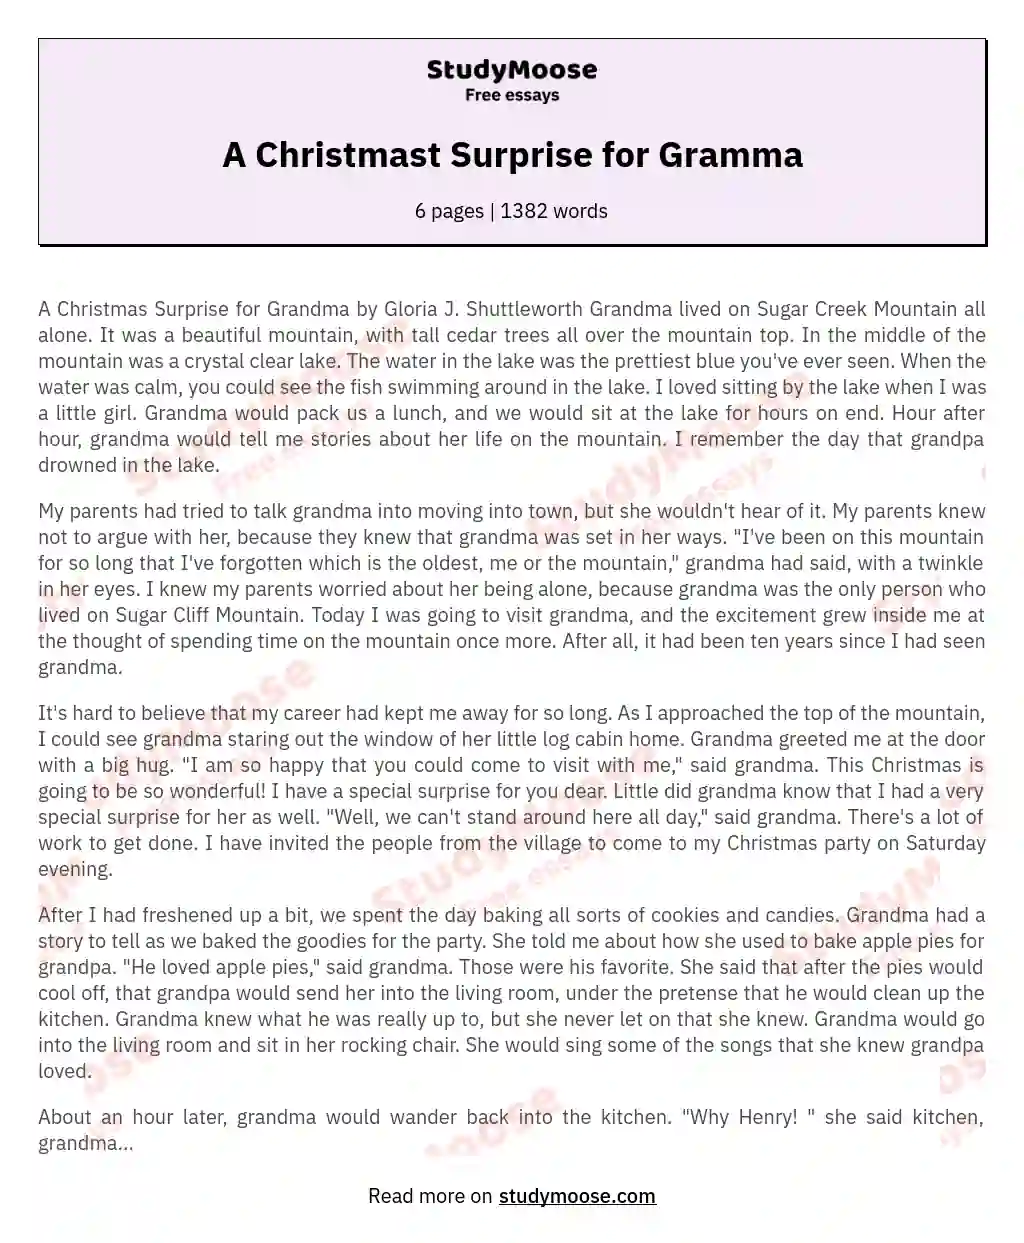 A Christmast Surprise for Gramma essay